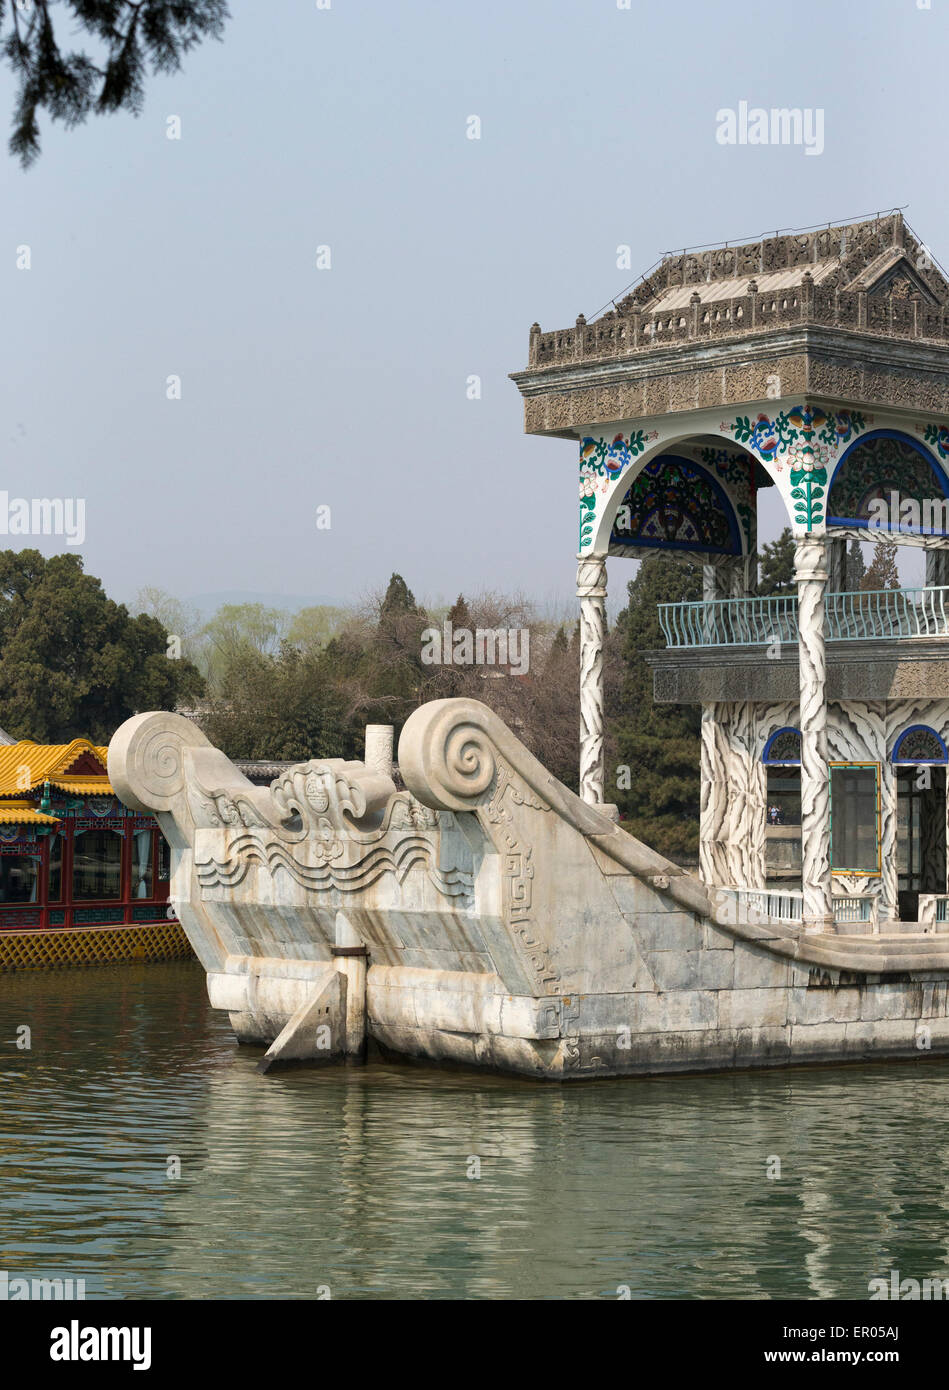 Marble boat (Shi Fang) of Purity and Ease, a pavilion at the Summer Palace in Beijing originally built in 1755 Stock Photo